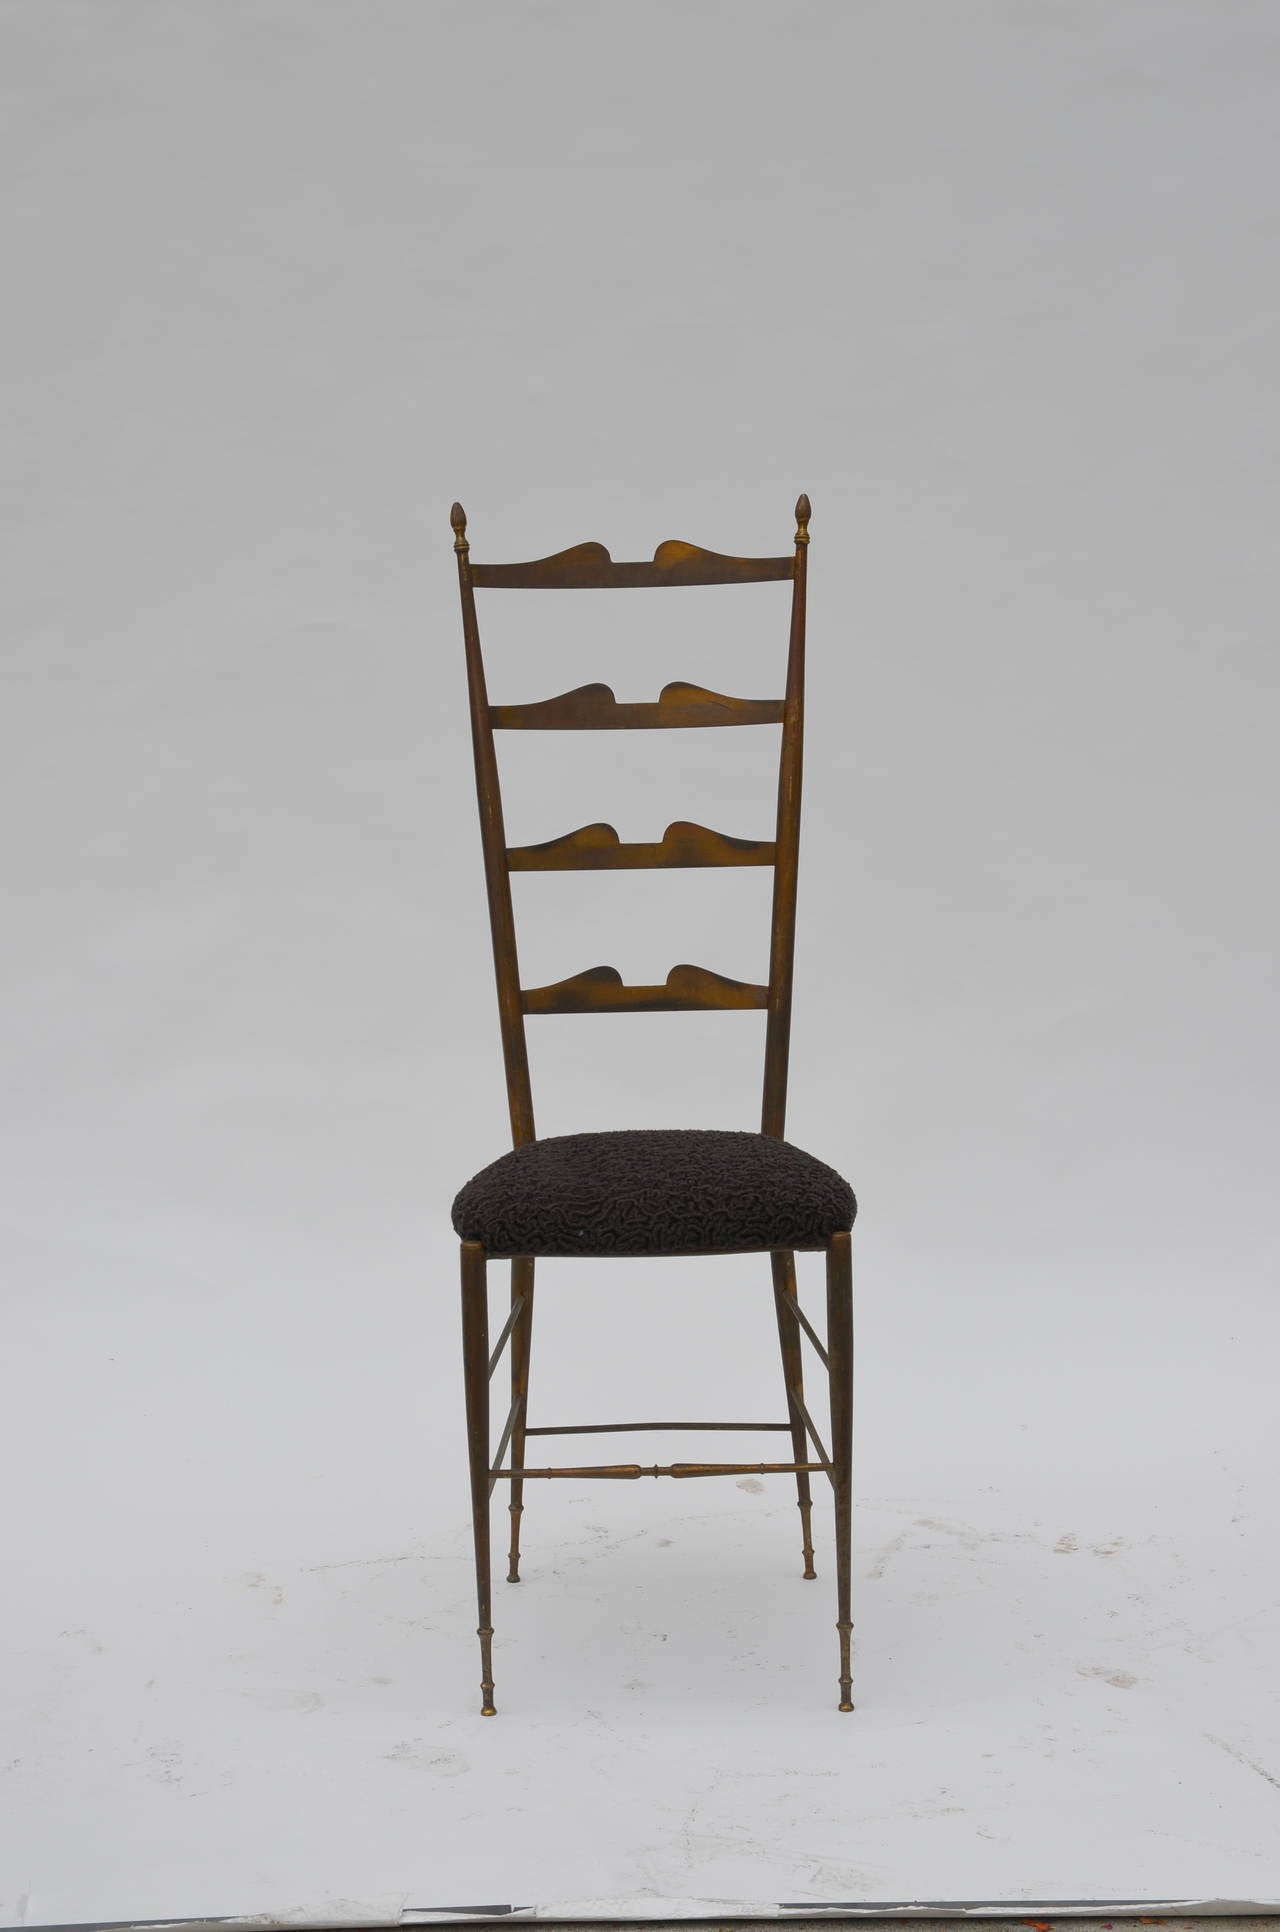 Tall Patinated Brass and Astrakhan Seat Side Chair by Chiavari.